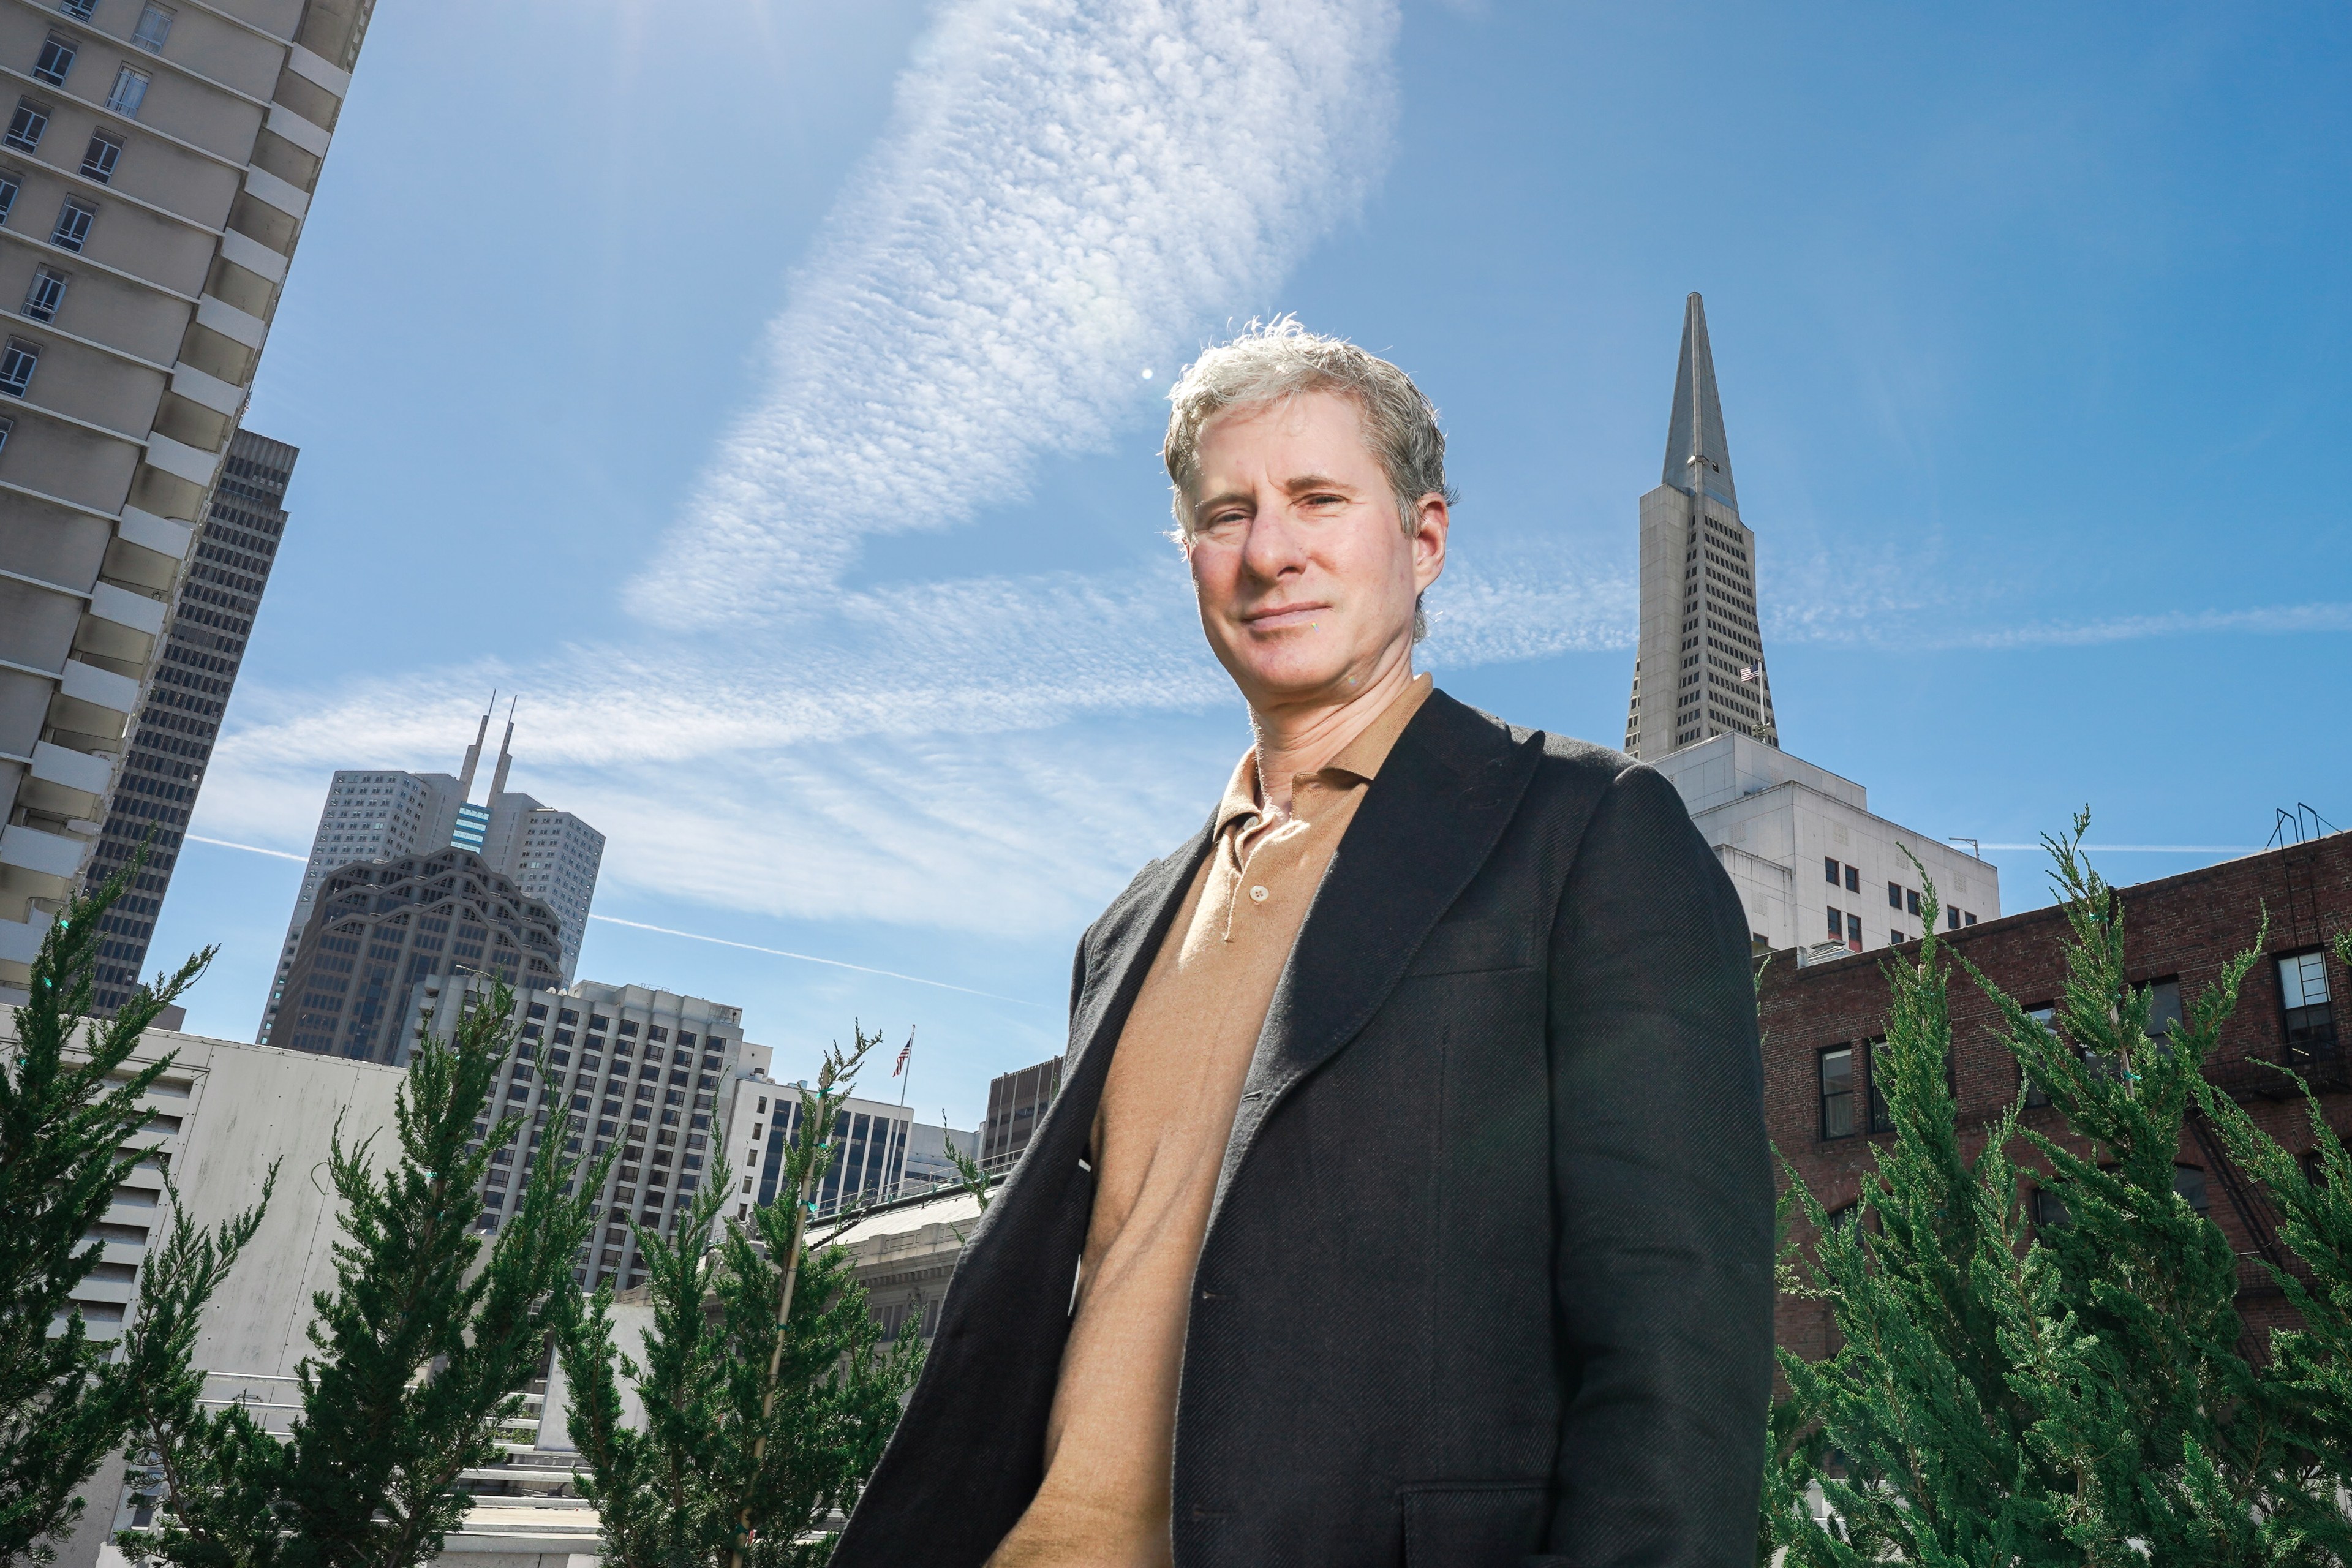 Chris Larsen stands before a cityscape with skyscrapers, a clear sky above, and greenery in the foreground.